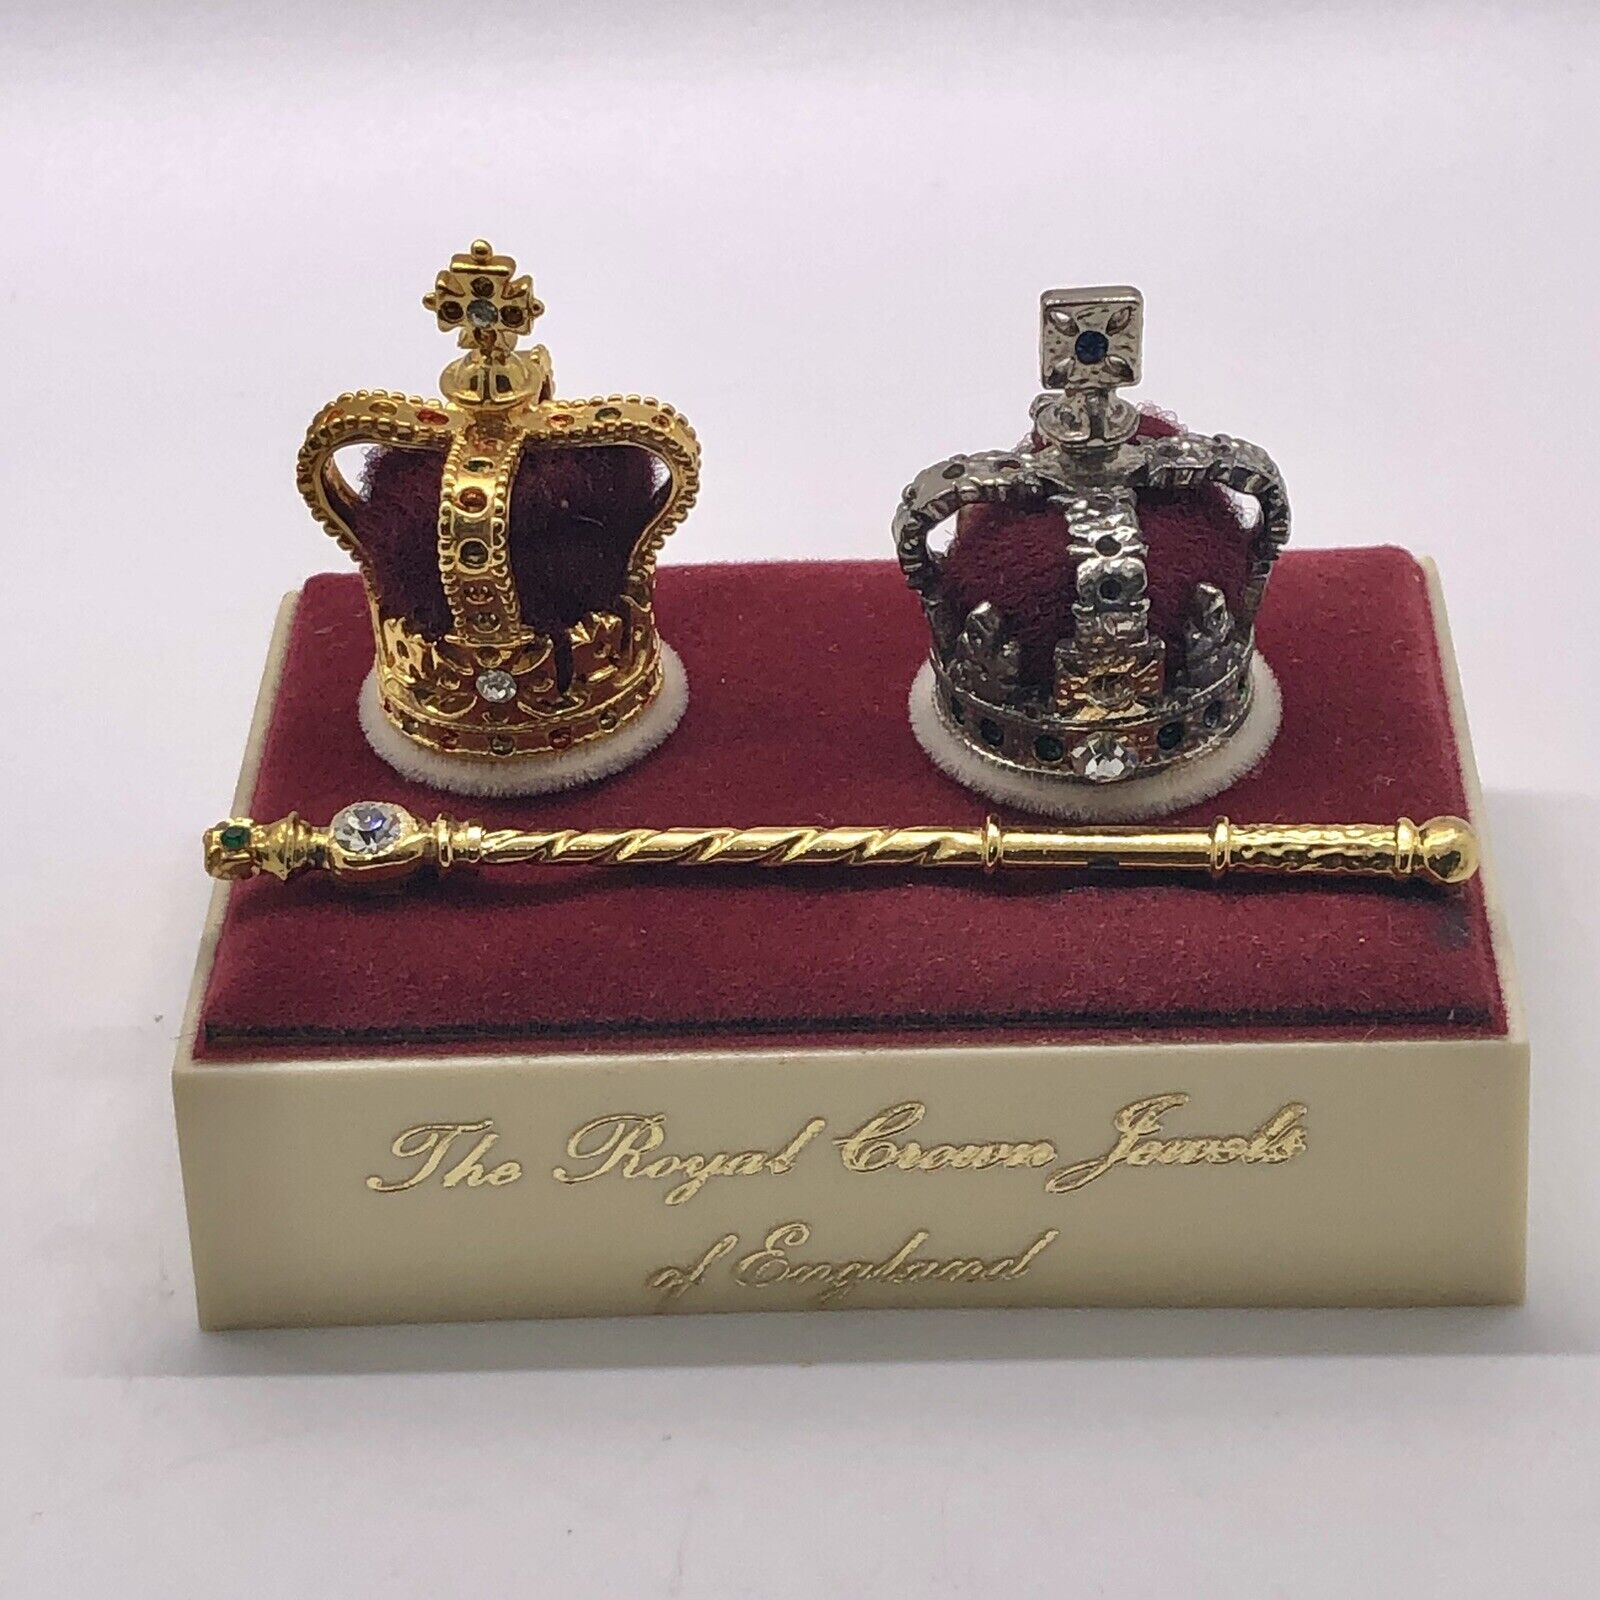 The Souvenir Set St. Edward’s Crown Imperial State Crown Charles II Sceptre VTG